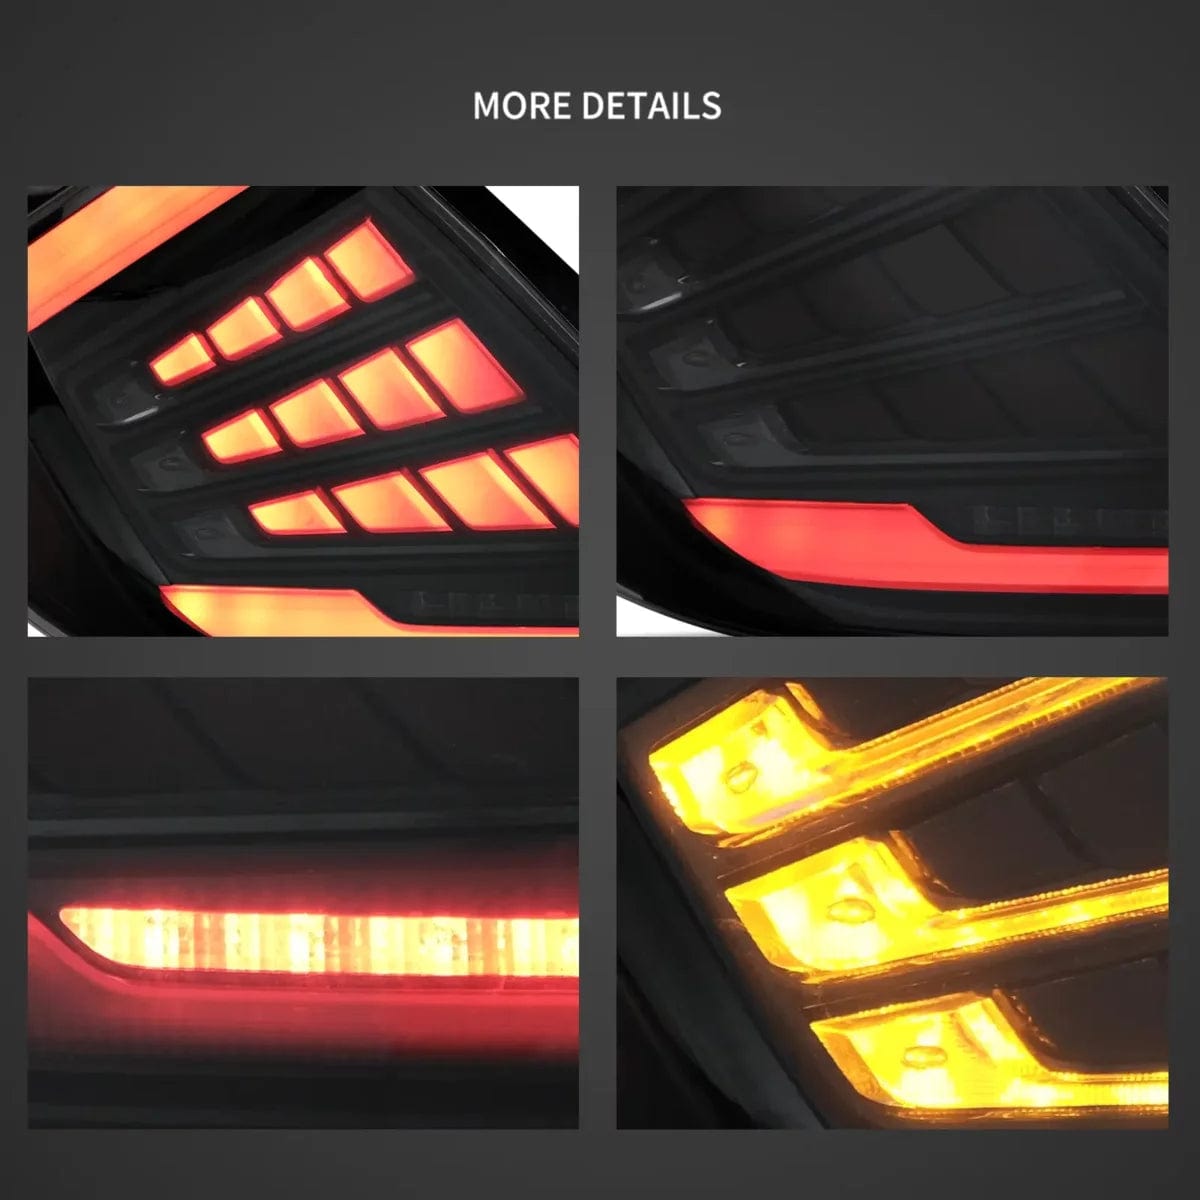 16-21 Honda Civic Hatchback Tail Lights with Dynamic Welcome Lighting - RGB Halo Kits Multicolor Flow Series Color Chasing RGBWA LED headlight kit Colorshift Oracle Lighting Trendz OneUpLighting Morimoto theretrofitsource AutoLEDTech Diode Dynamics